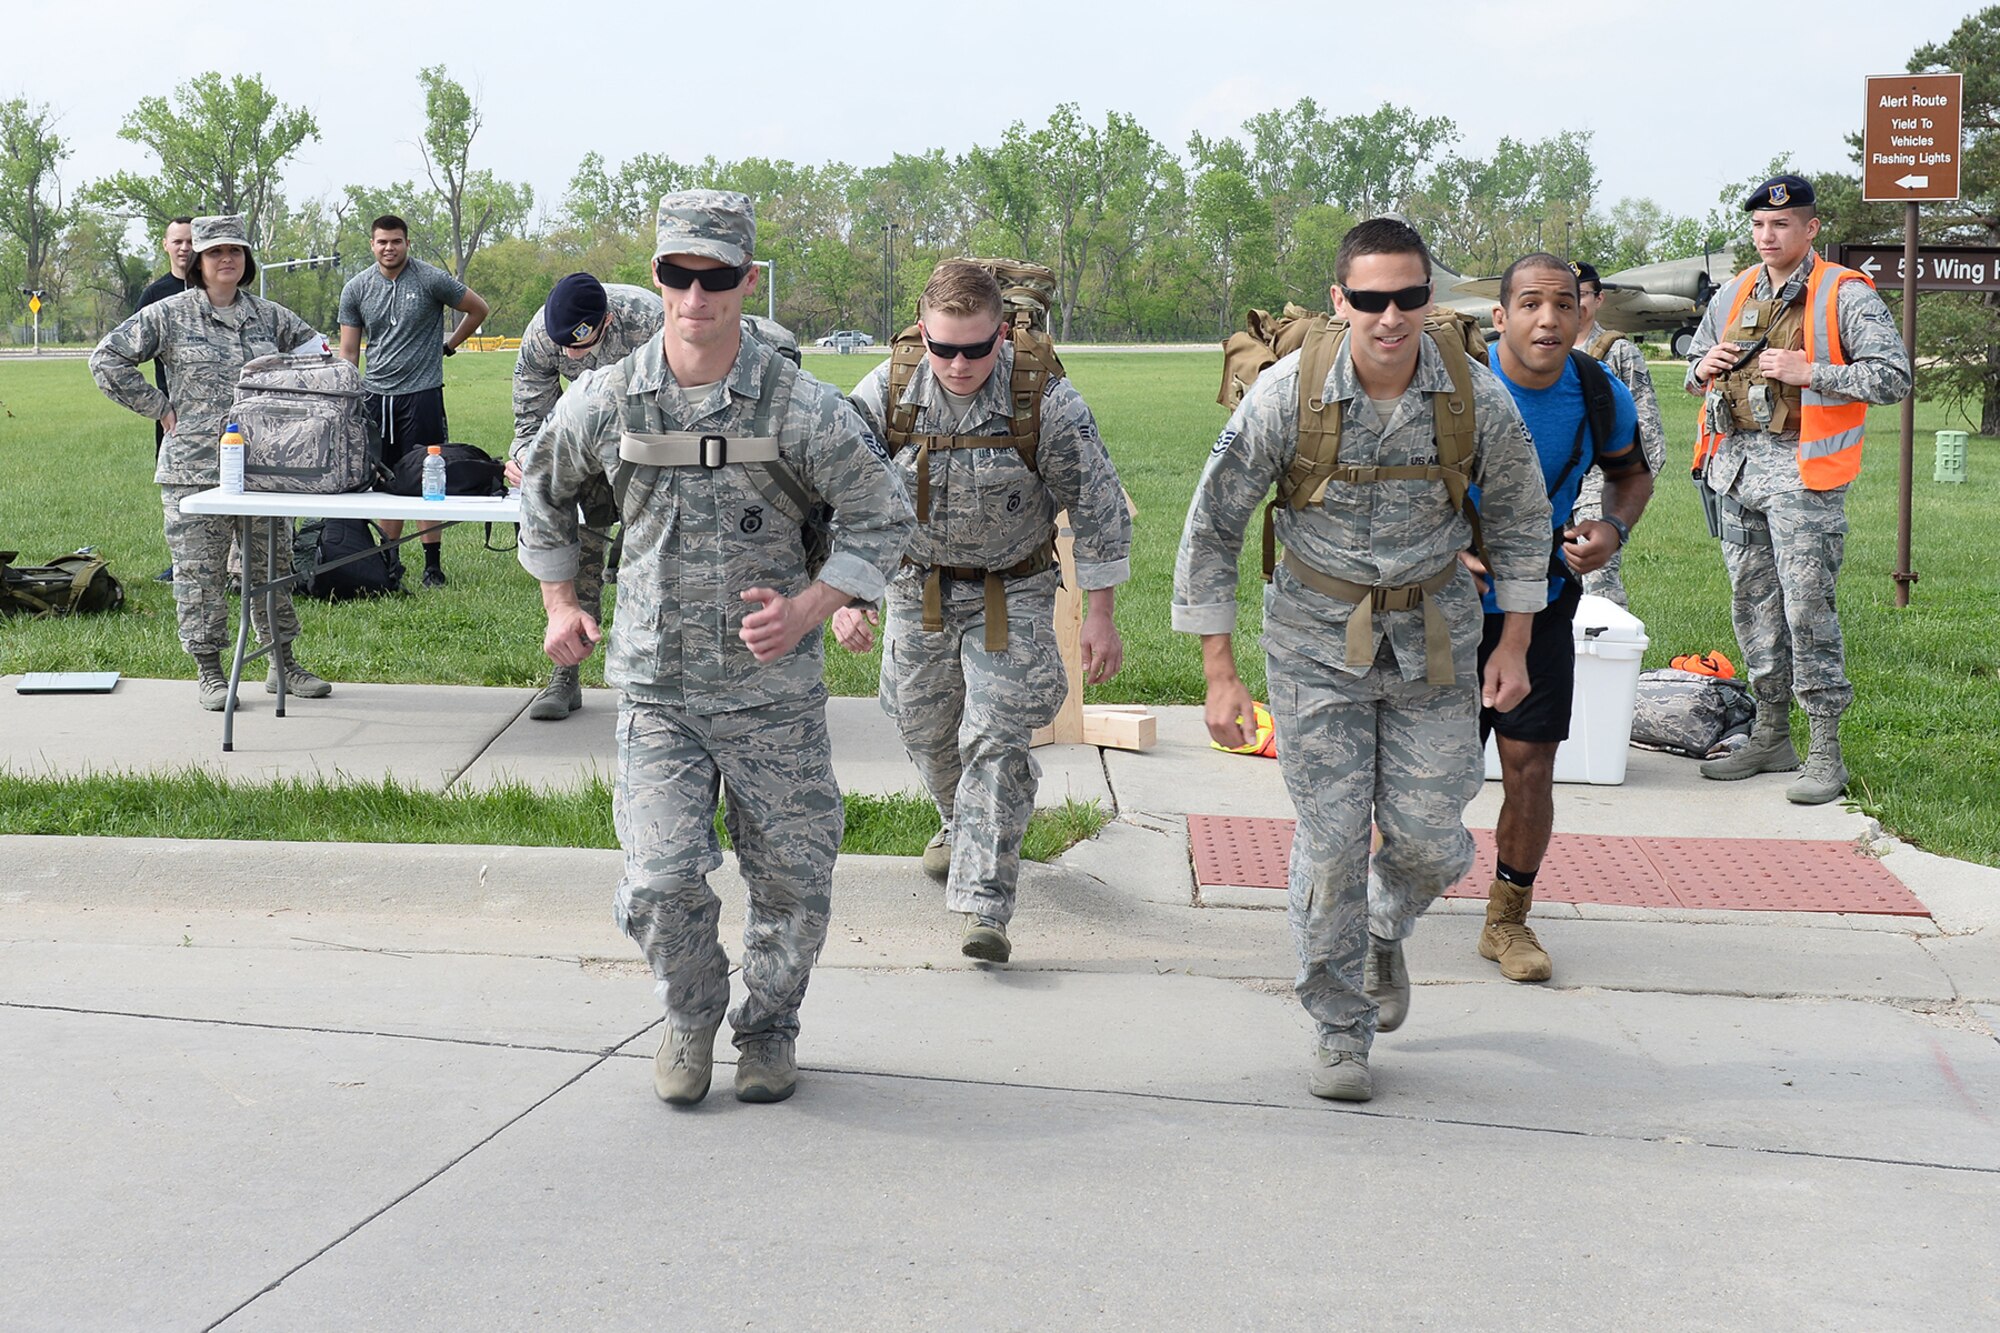 55th Security Forces Squadron Airmen begin to run during a ruck march challenge May 14, 2018, at Offutt Air Force Base, Nebraska. Team two ran and walked 2 miles from the Patriot Club parking lot to Peacekeeper Drive in 38 minutes and 25 seconds to earn first place in this challenge.  (U.S. Air Force photo by Charles J. Haymond)